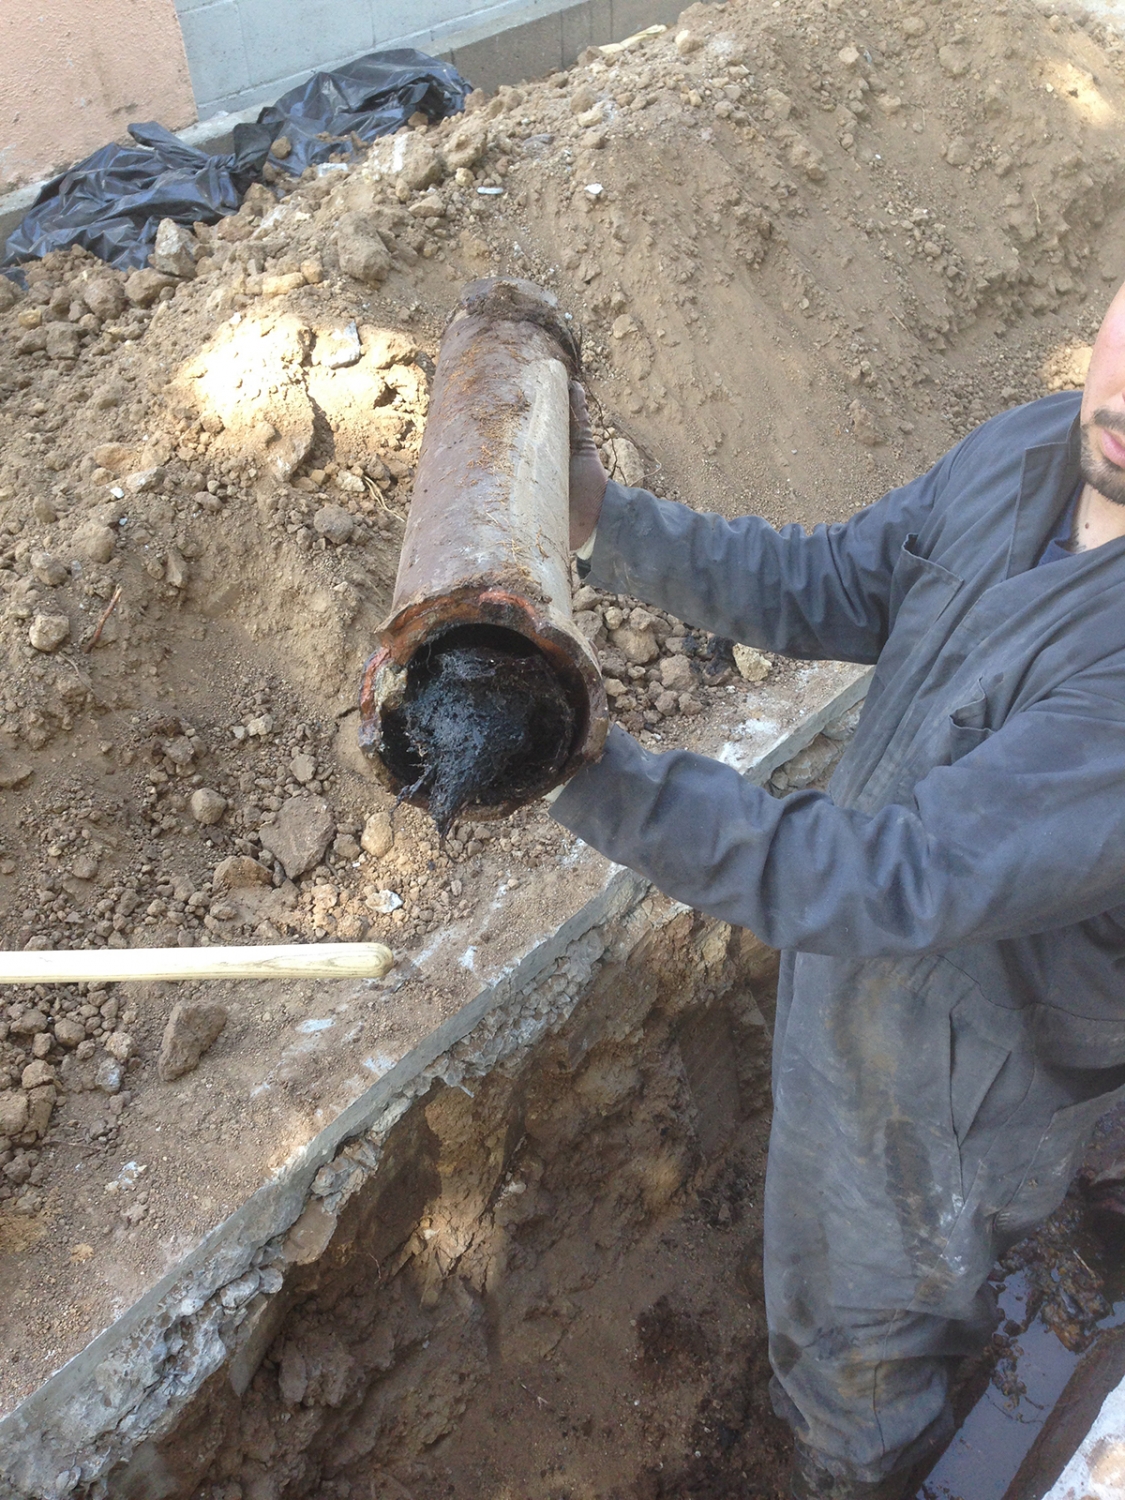 Holding Up A Damaged Main Sewer Line Pipe With Tree Root Intrusion